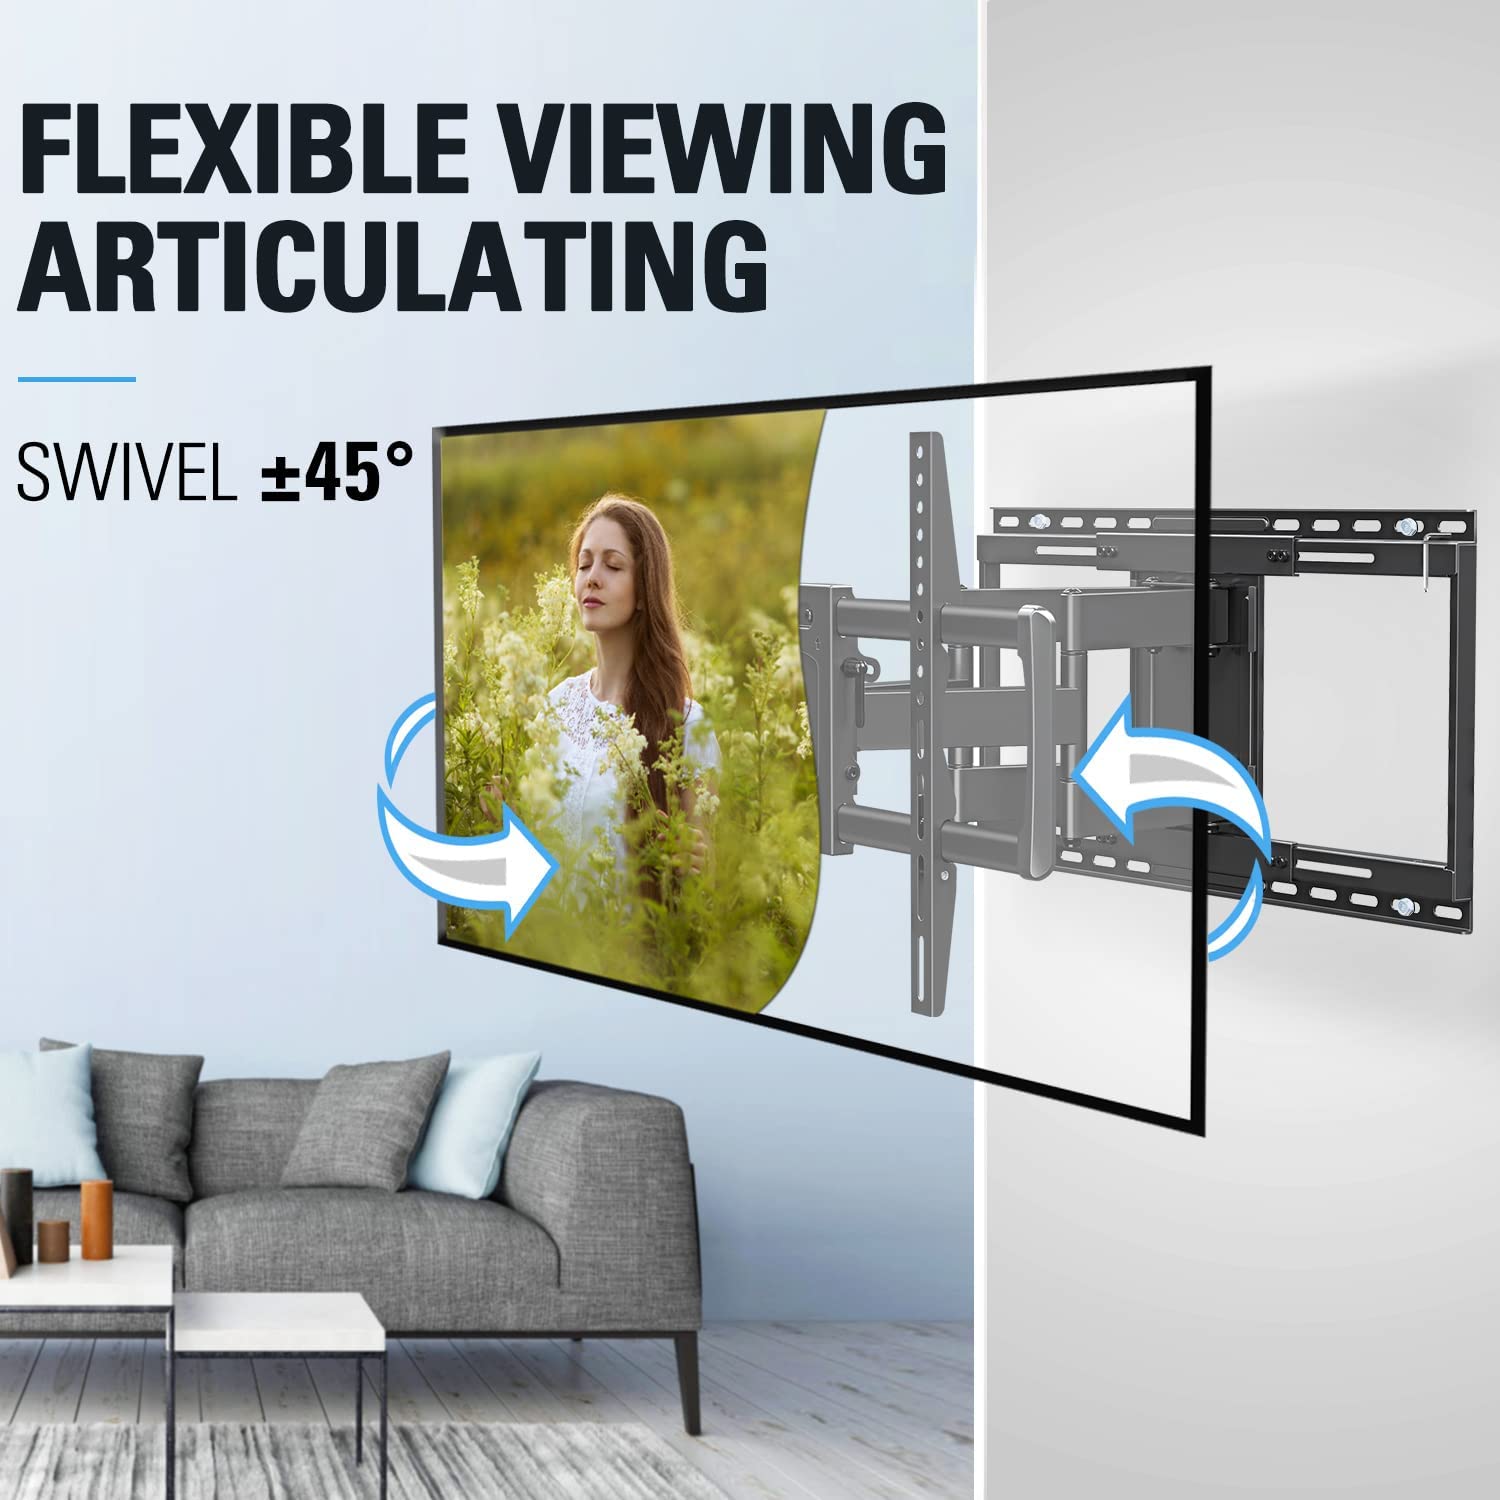 swivel tv wall mount for flexible viewing